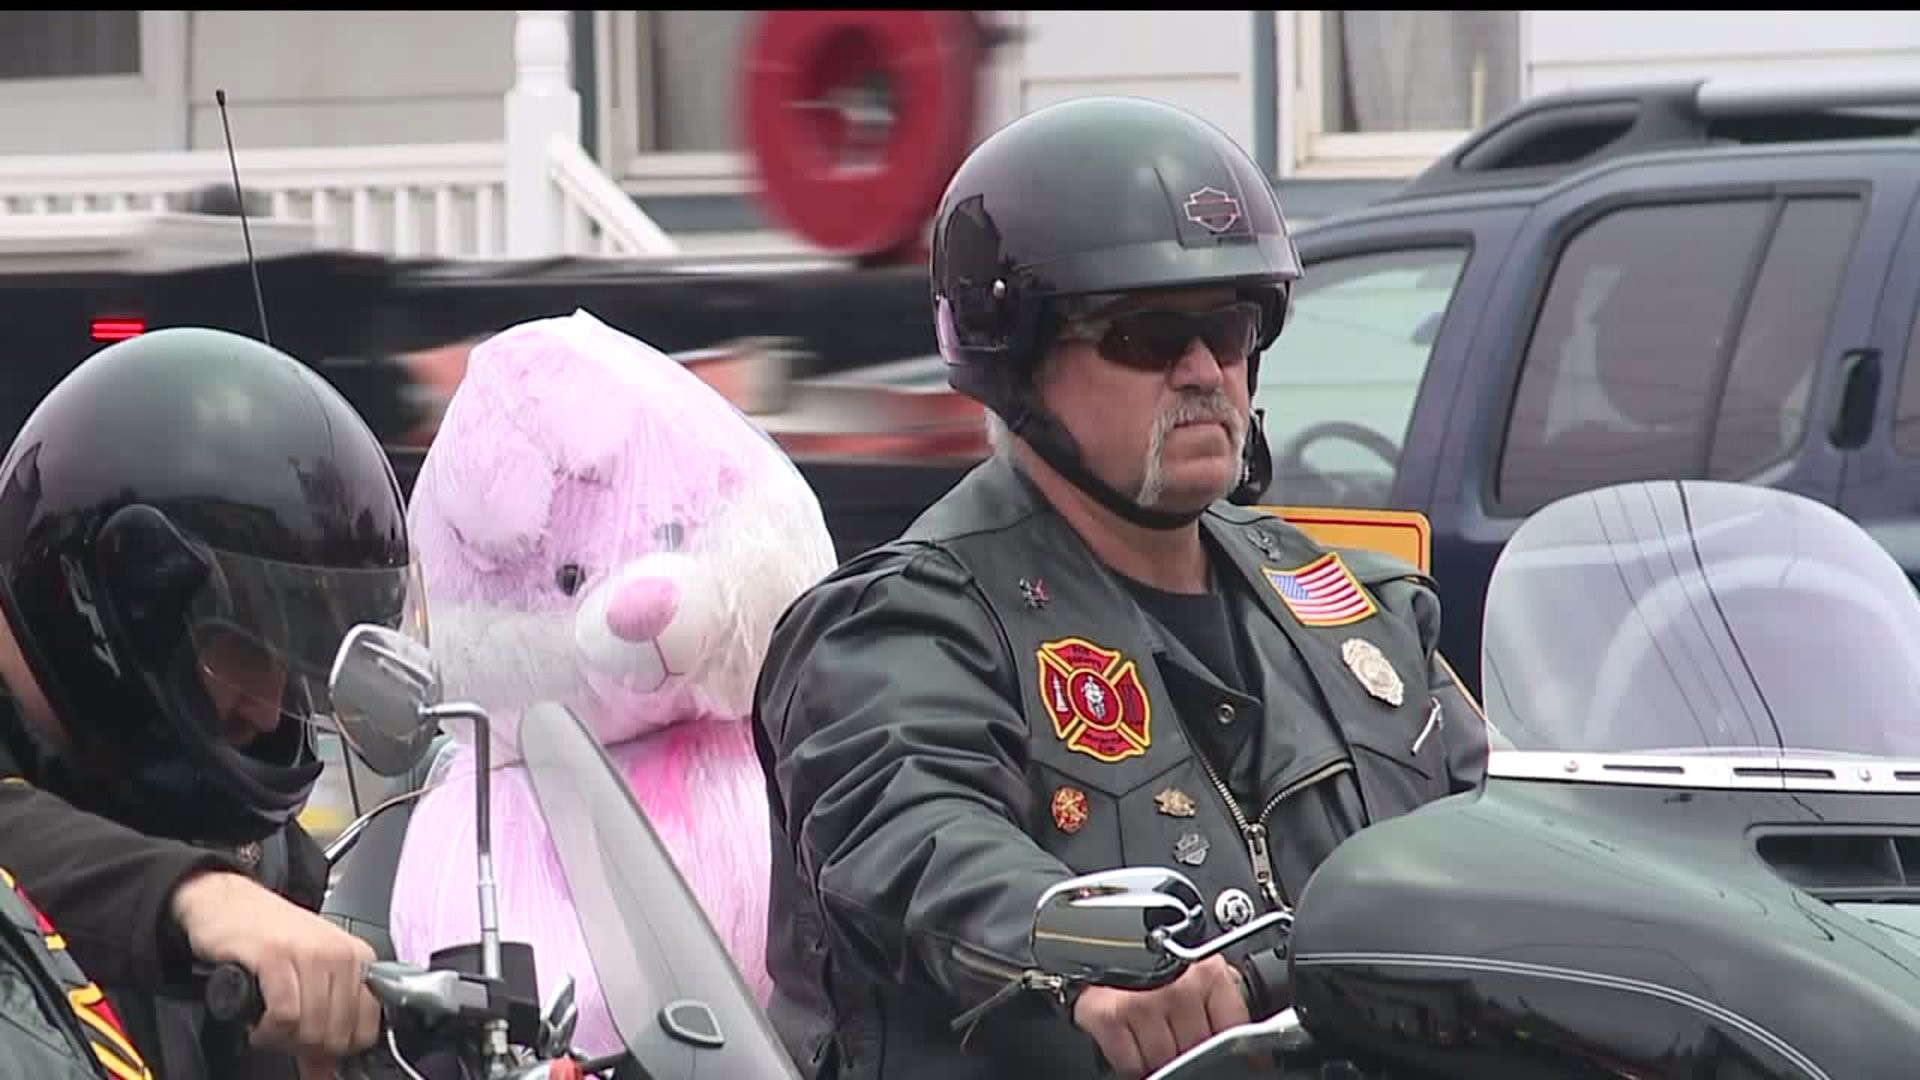 Bikers rev their engines and deliver Easter to children across the area